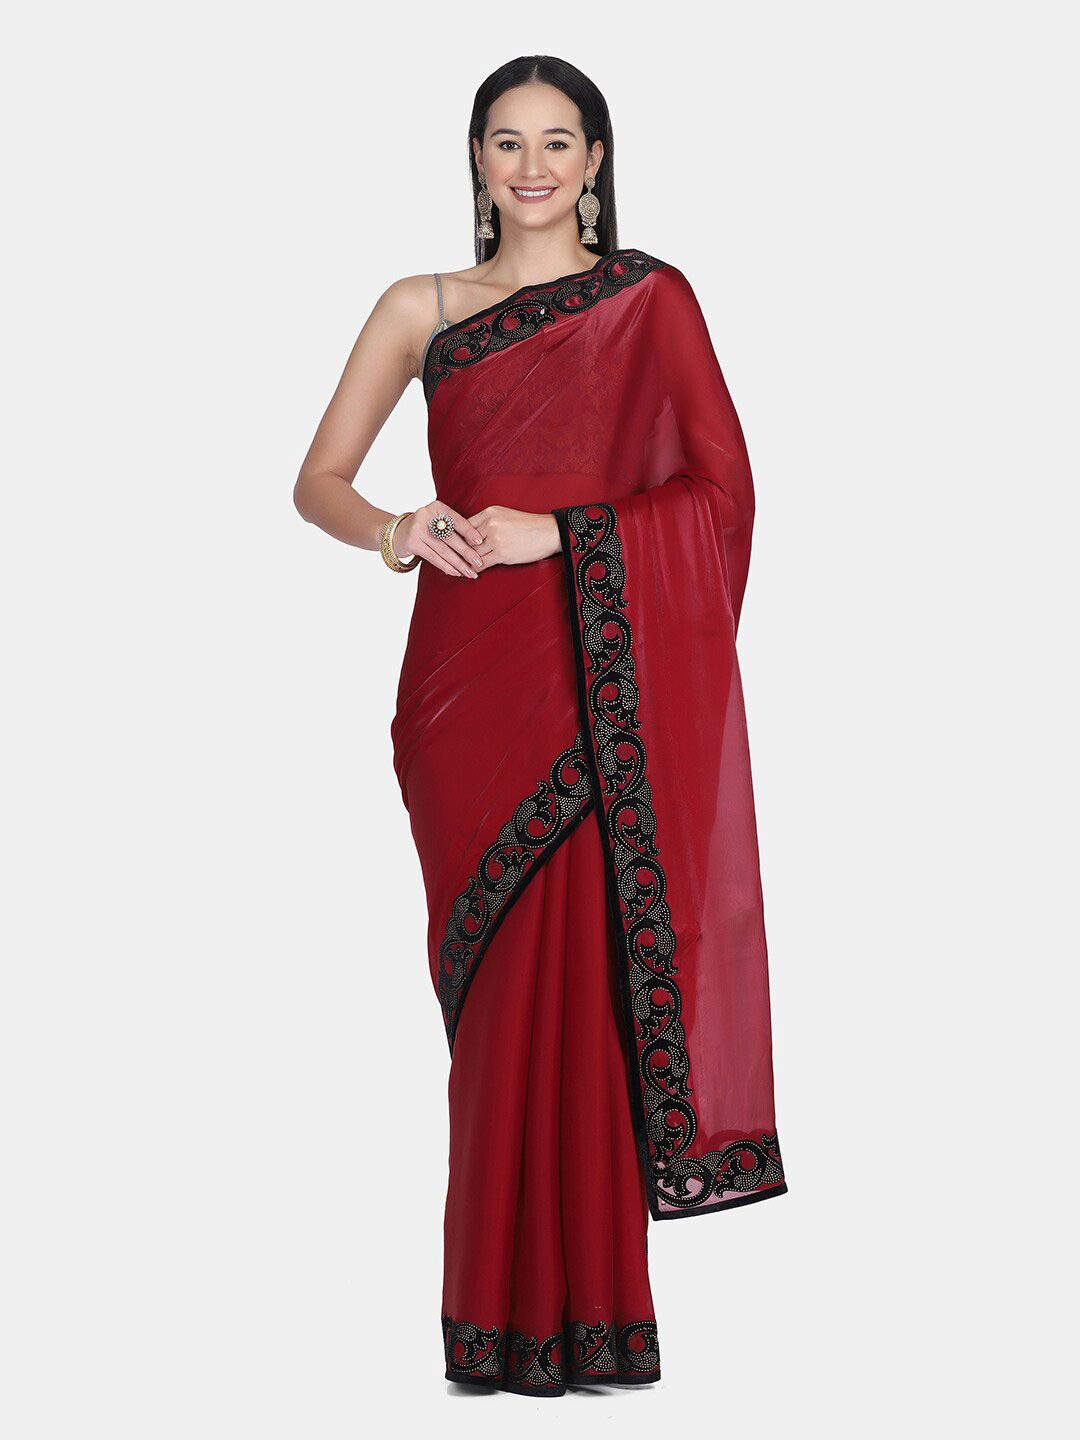 BOMBAY SELECTIONS Maroon & Black Embellished Pure Crepe Saree Price in India